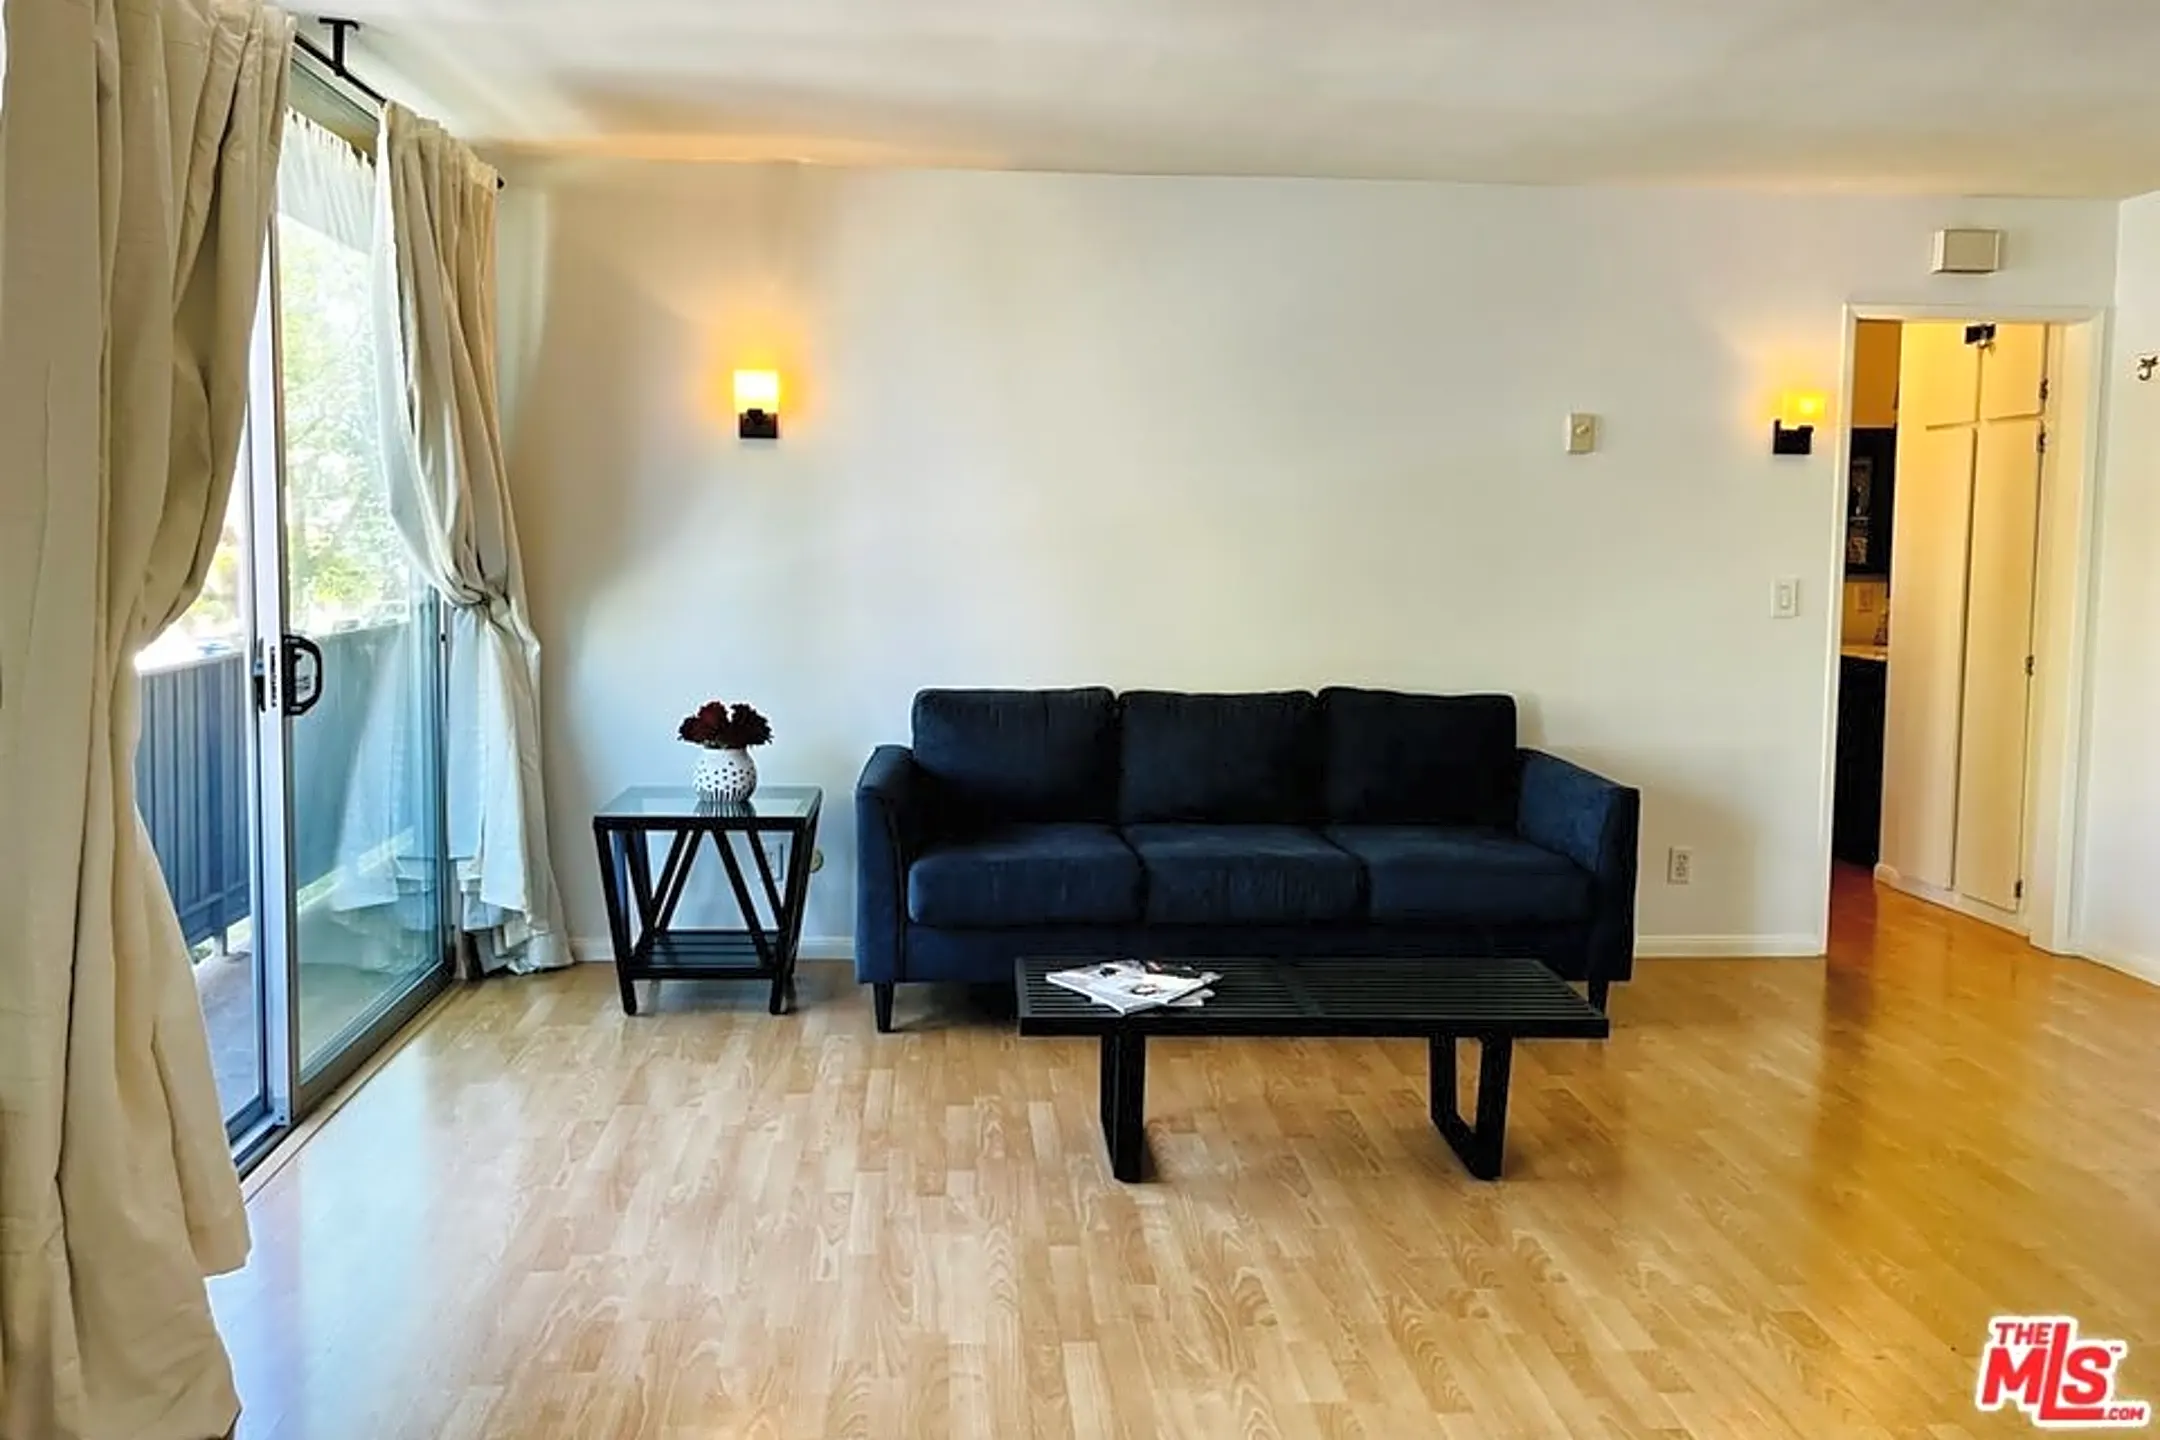 Living Room - 525 N Sycamore Ave #204 - Los Angeles, CA